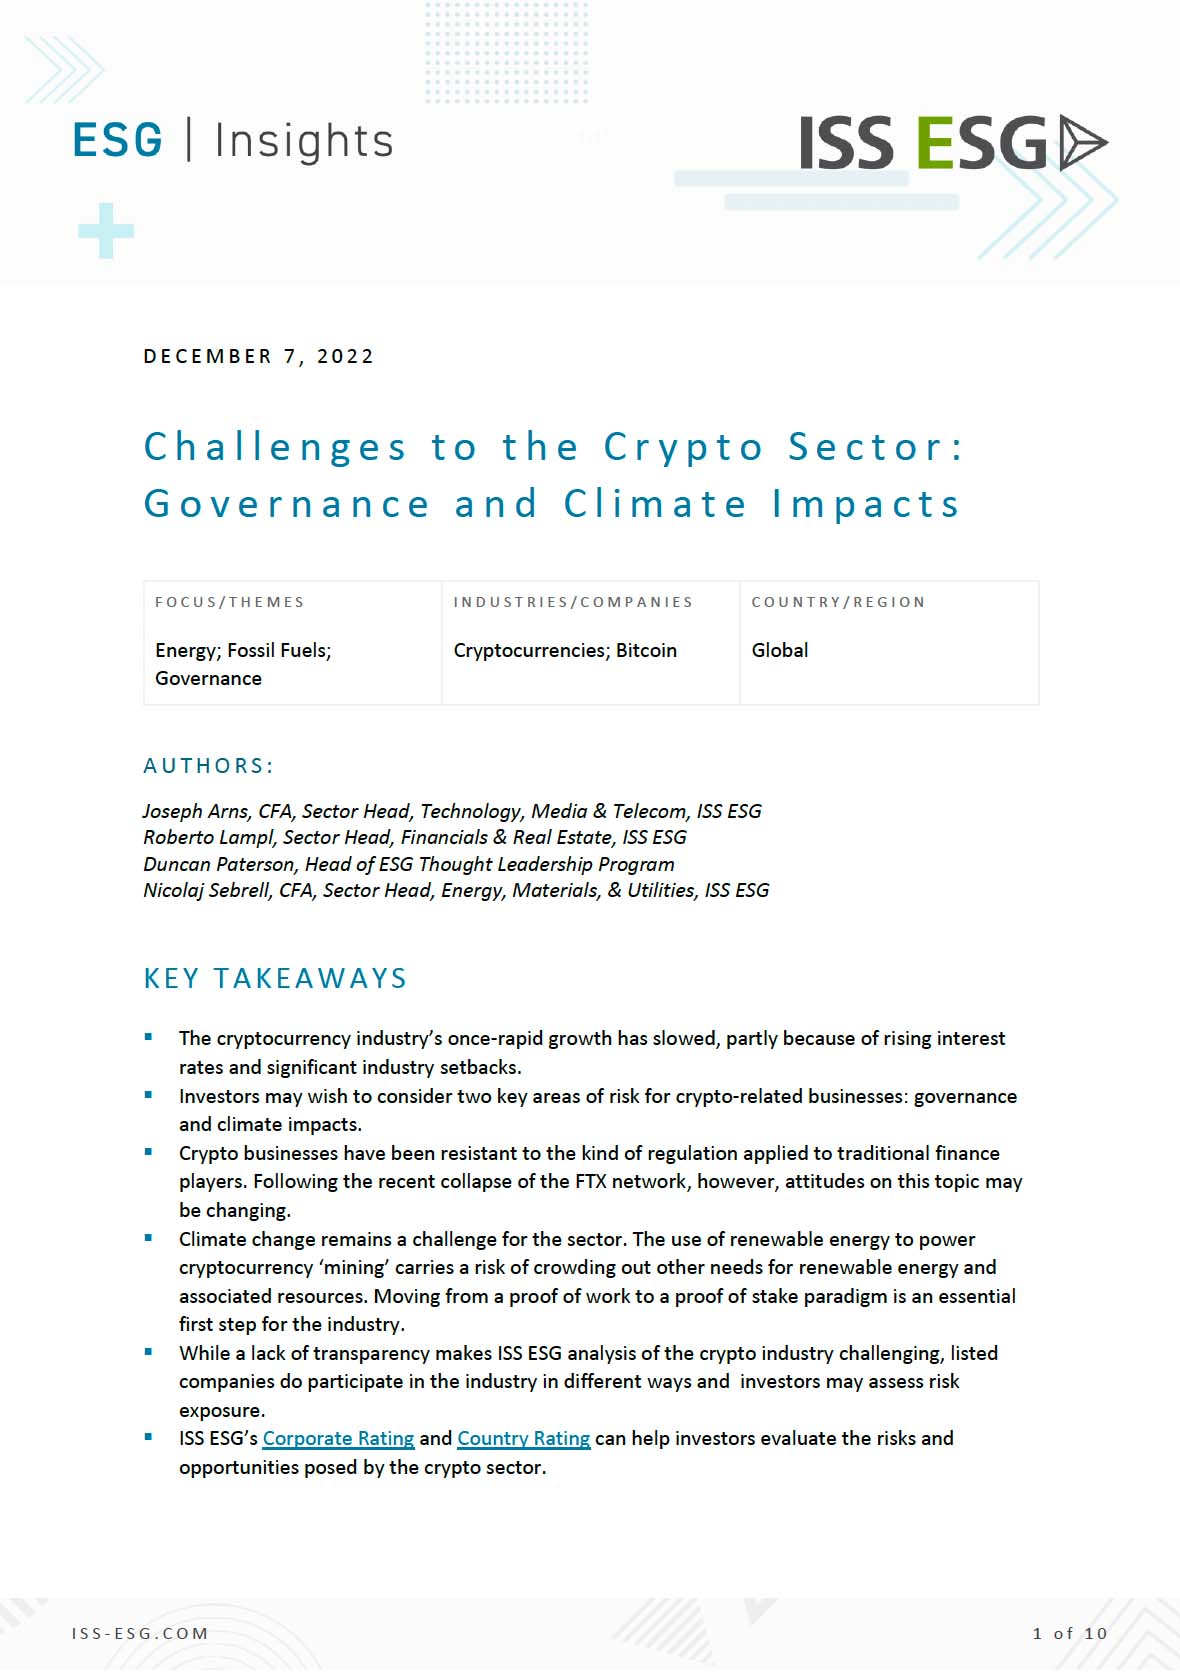 Challenges to the Crypto Sector: Governance and Climate Impacts